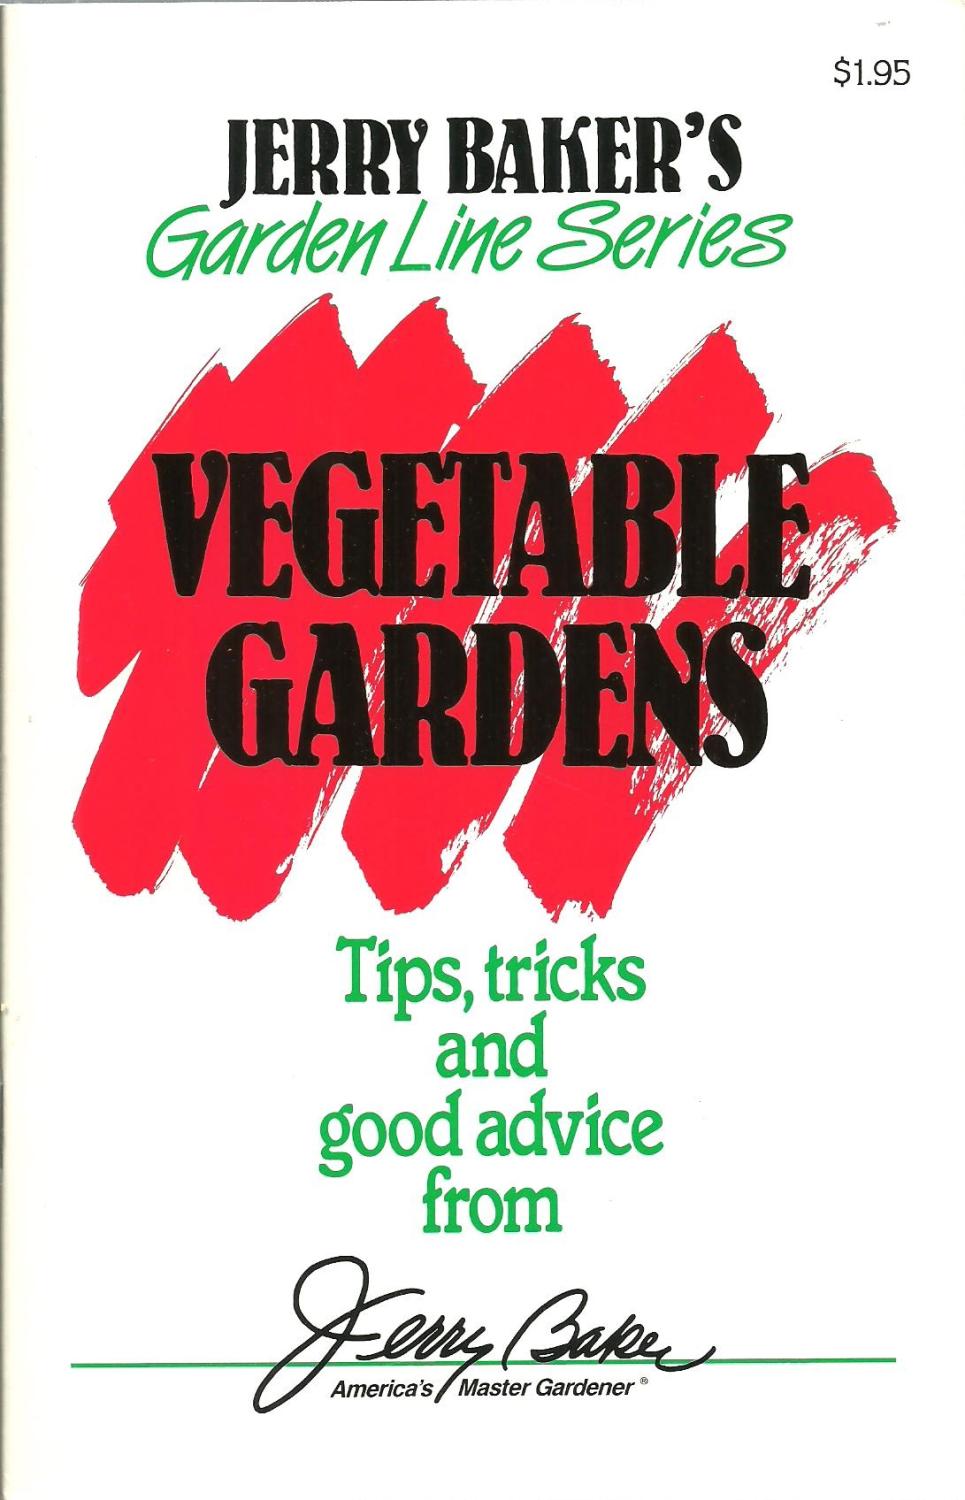 Vegetable Gardens Tips Tricks And Good Advice From Jerry Baker